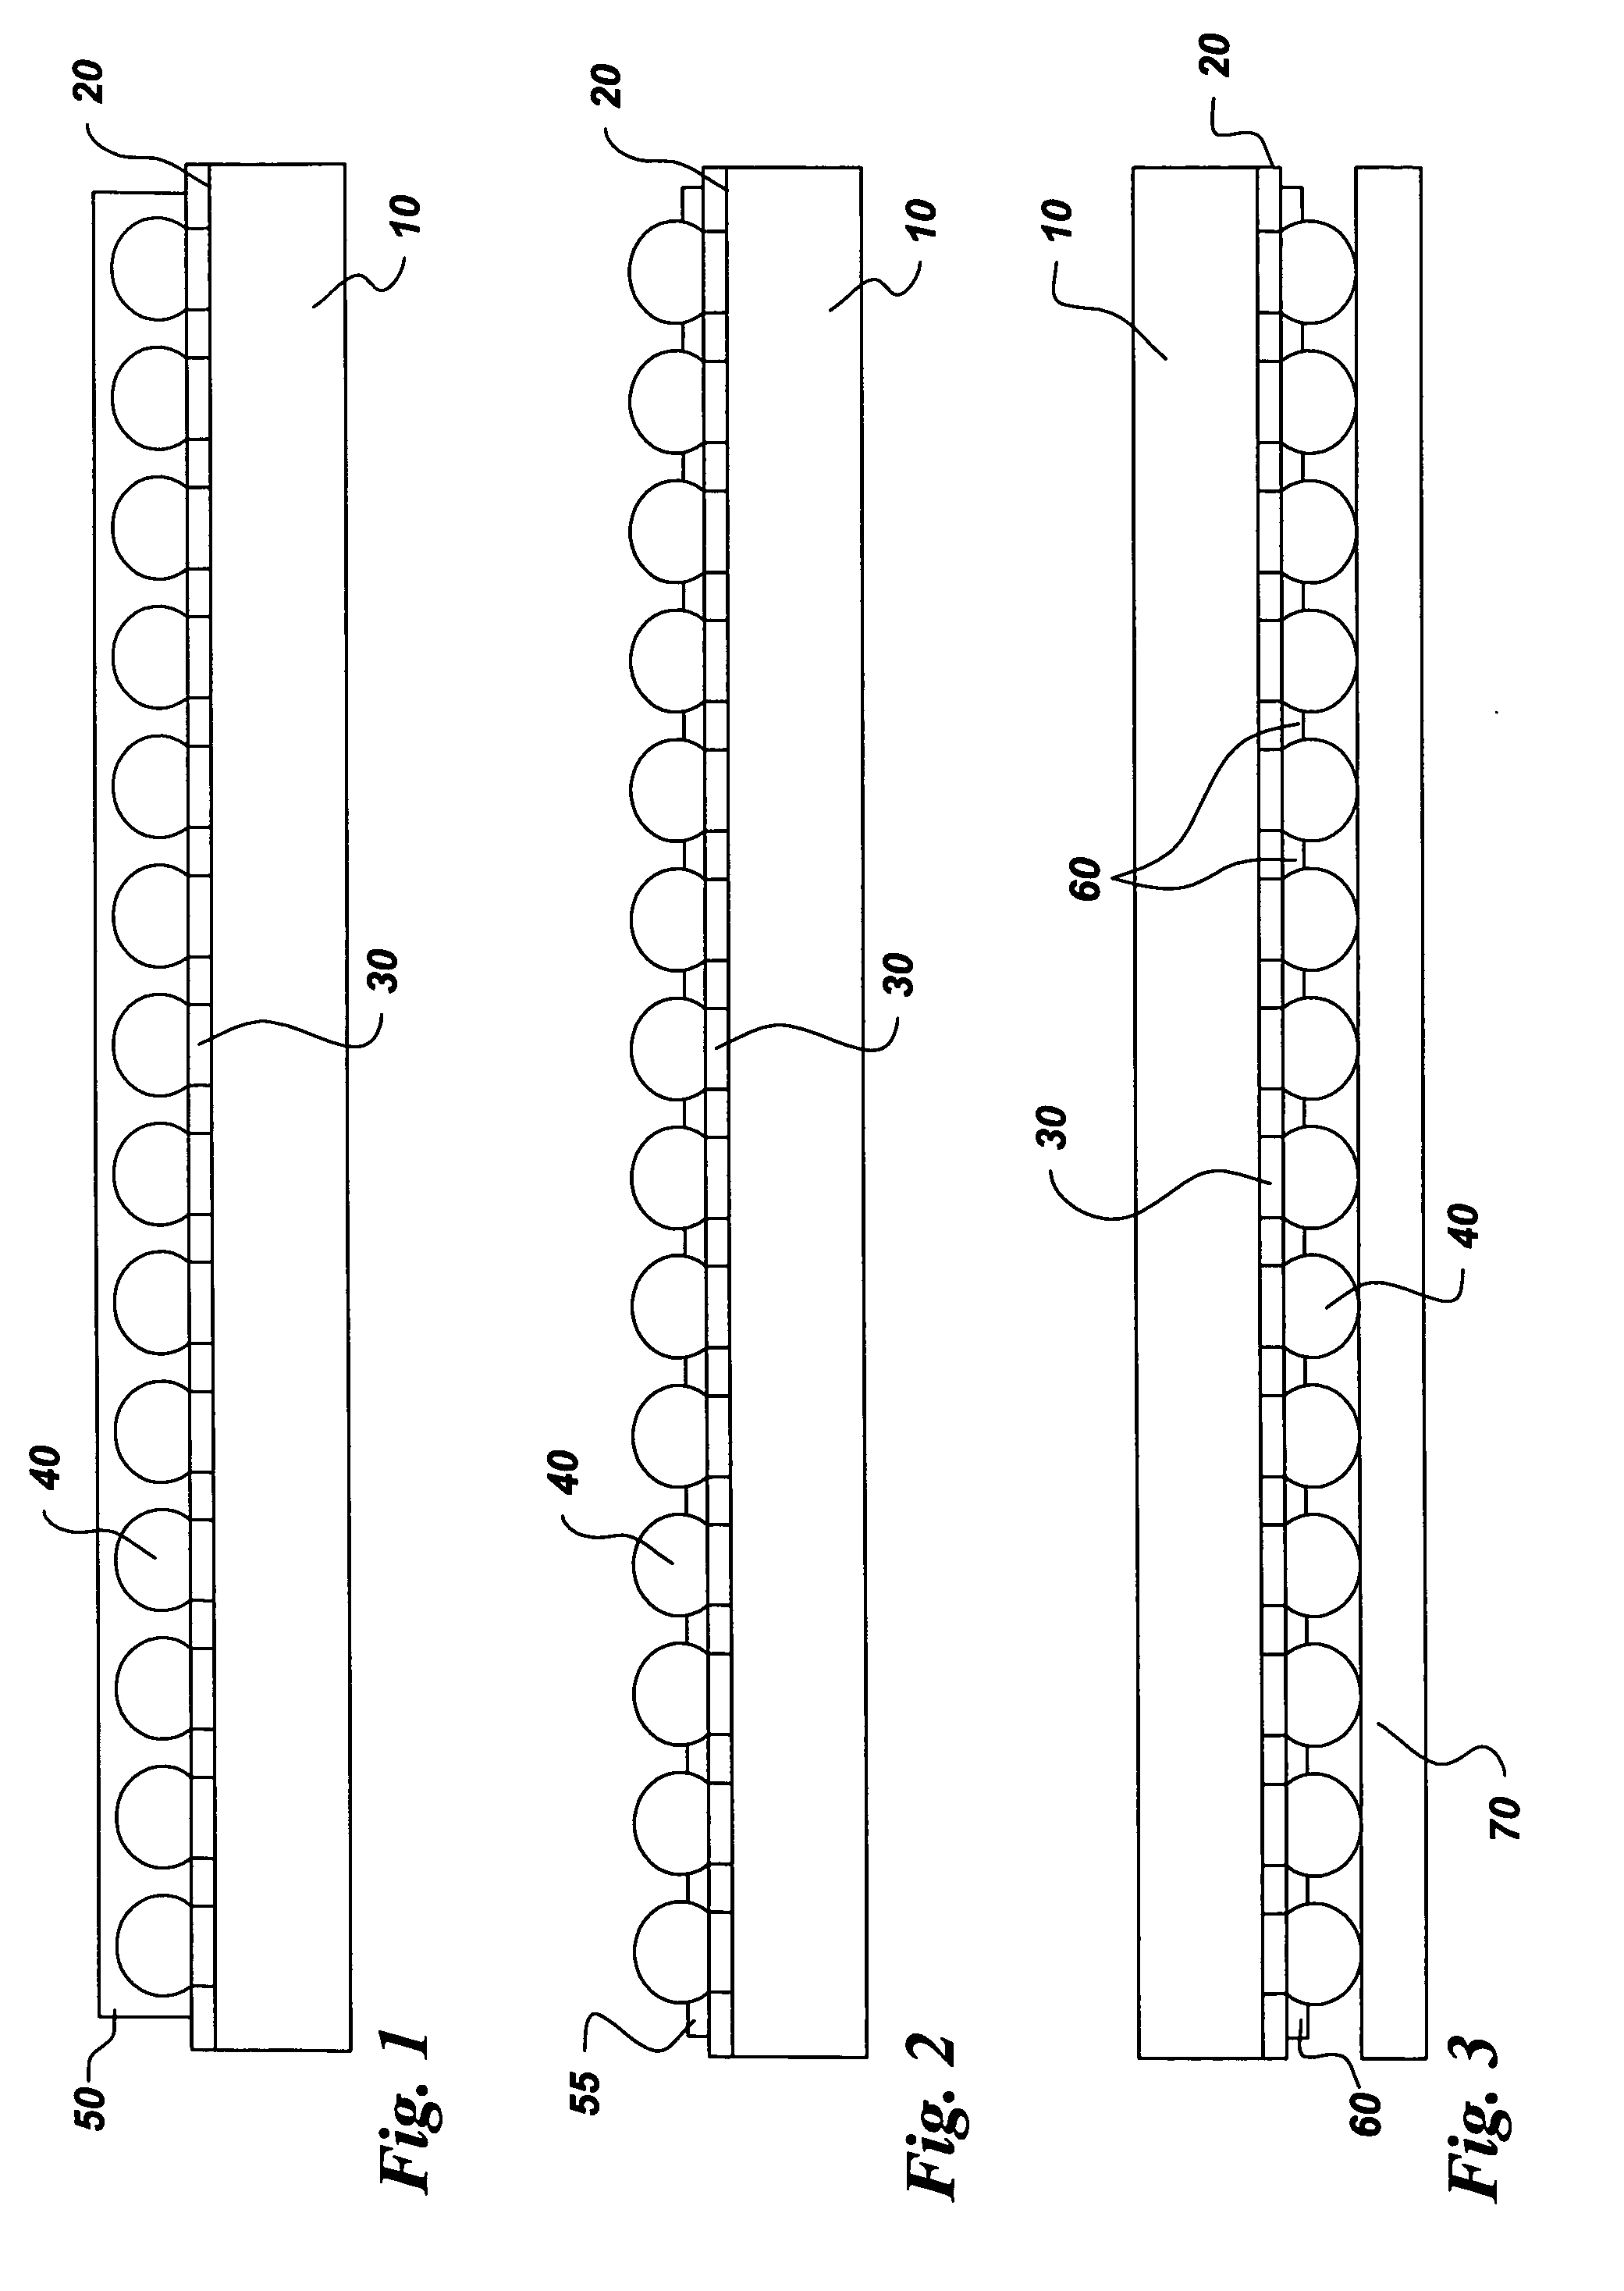 Method of forming electronic devices